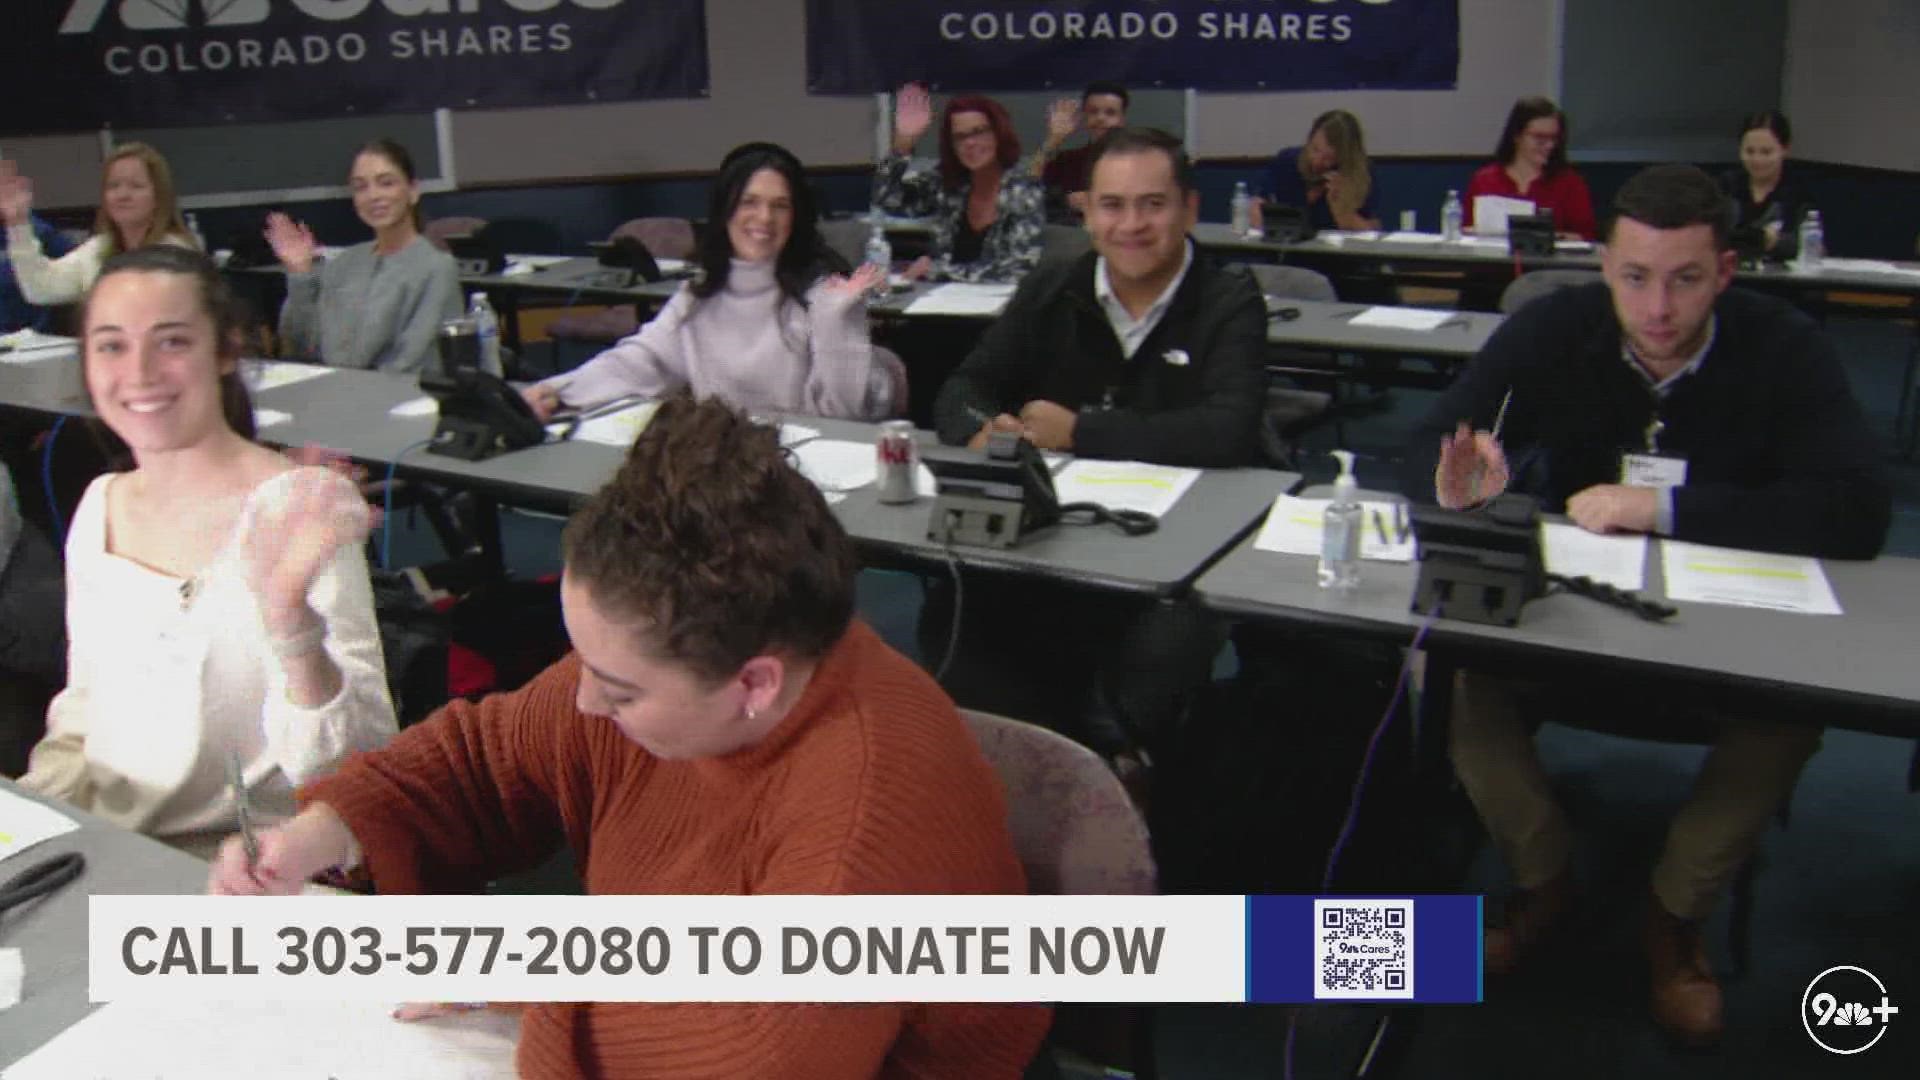 You can donate to 9Cares Colorado Shares via our telethon at 303-577-2080 on Thursday until 10:30 p.m.